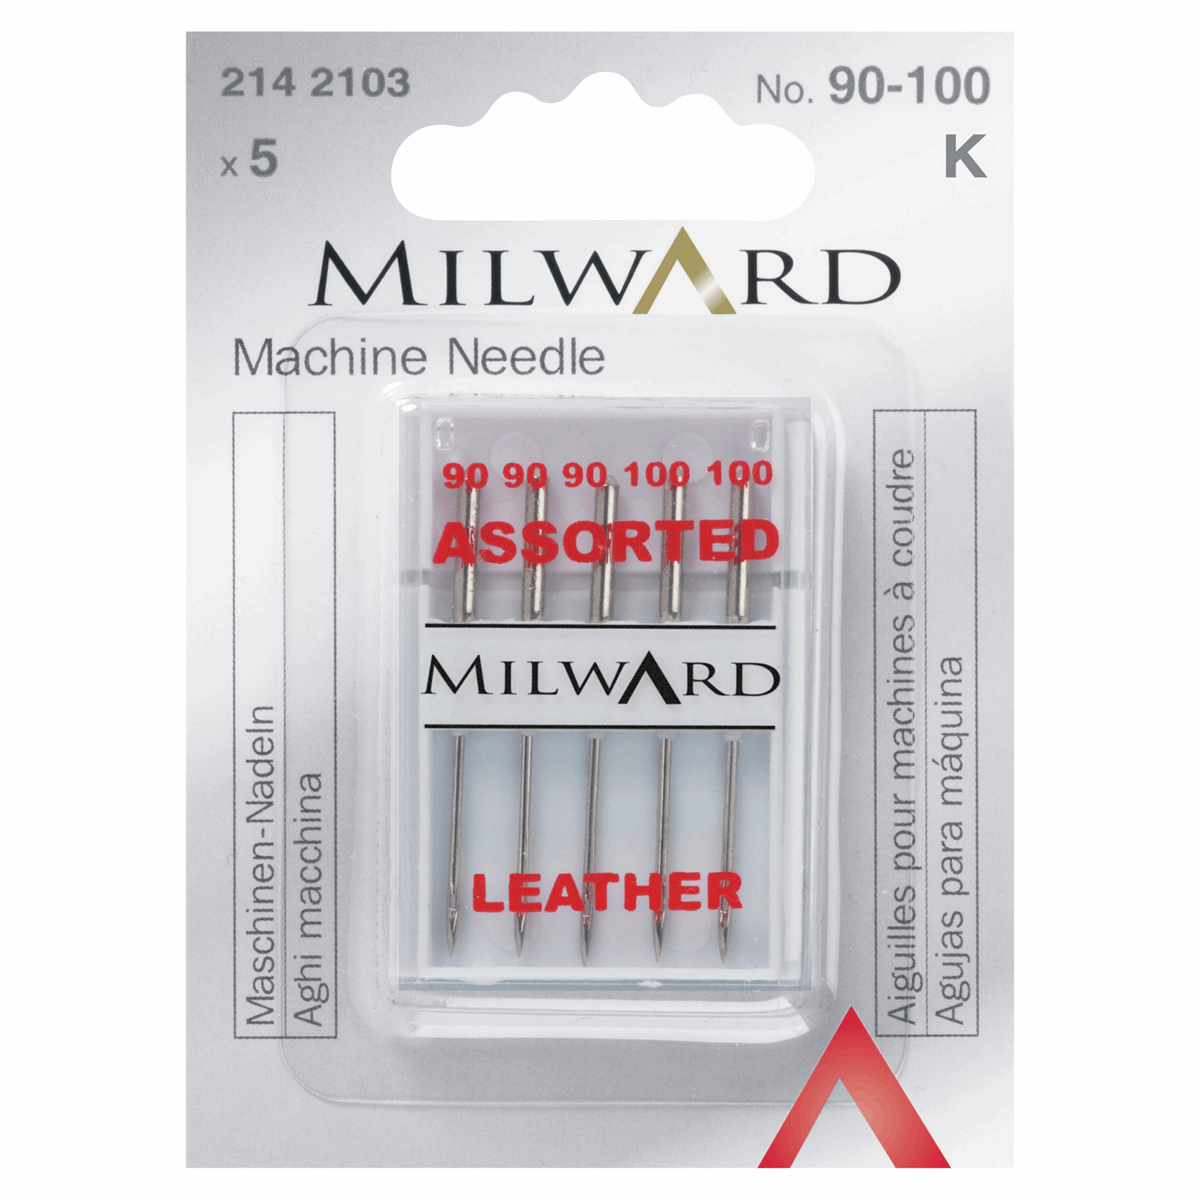 Milward - Sewing Machine Needles - Leather - Assorted